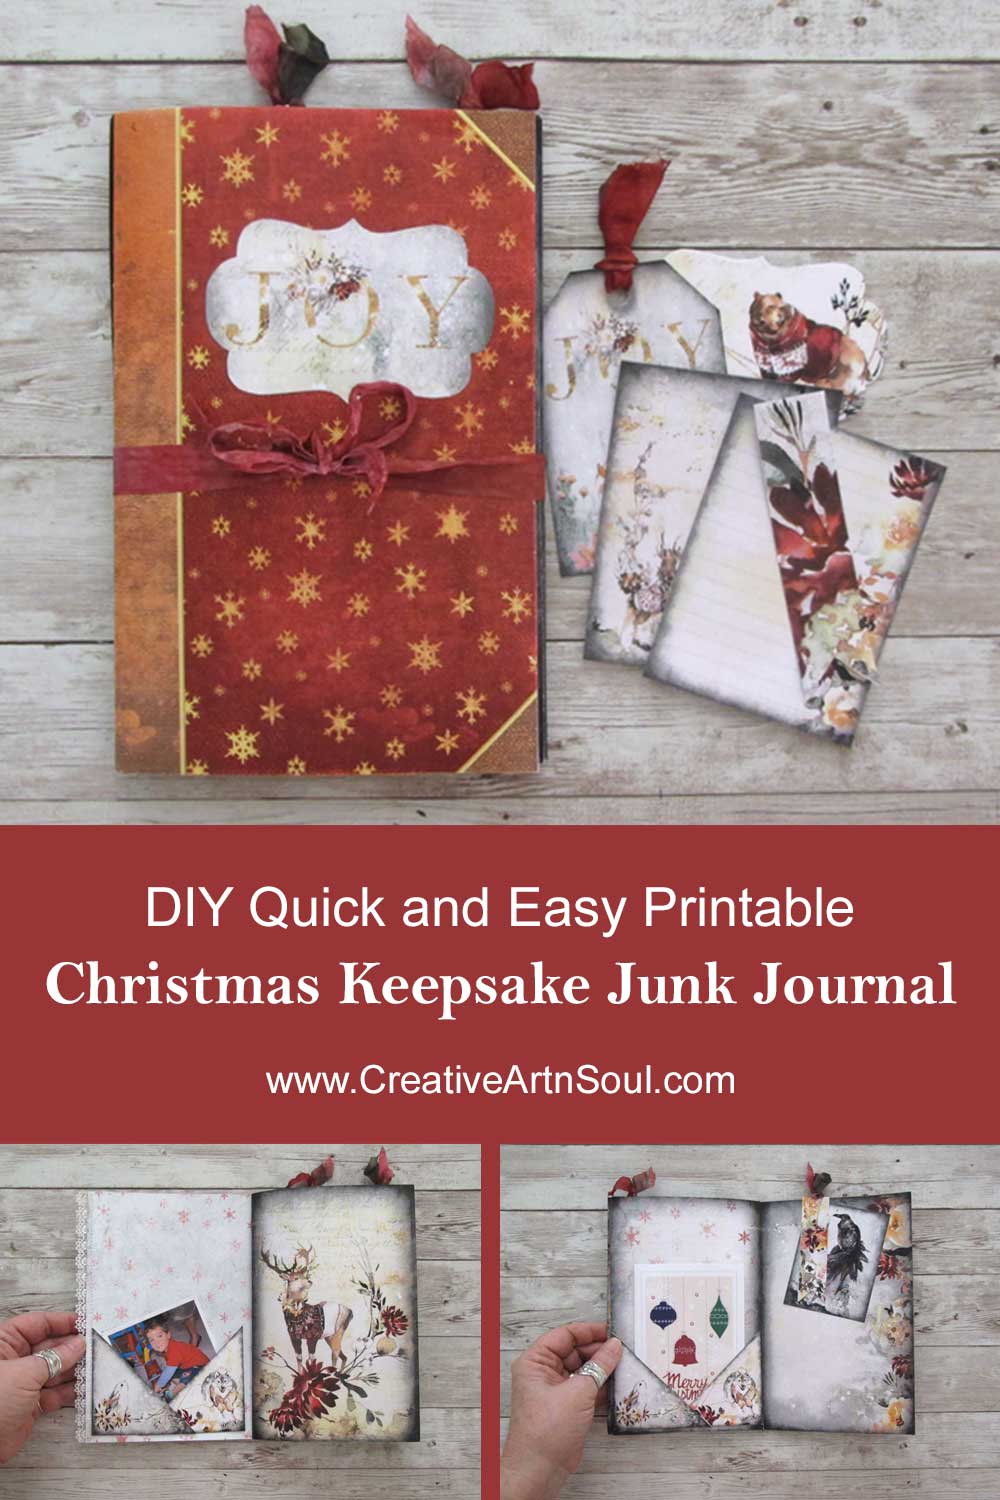 How to Make a Quick and Easy Printable Keepsake Junk Journal for Christmas